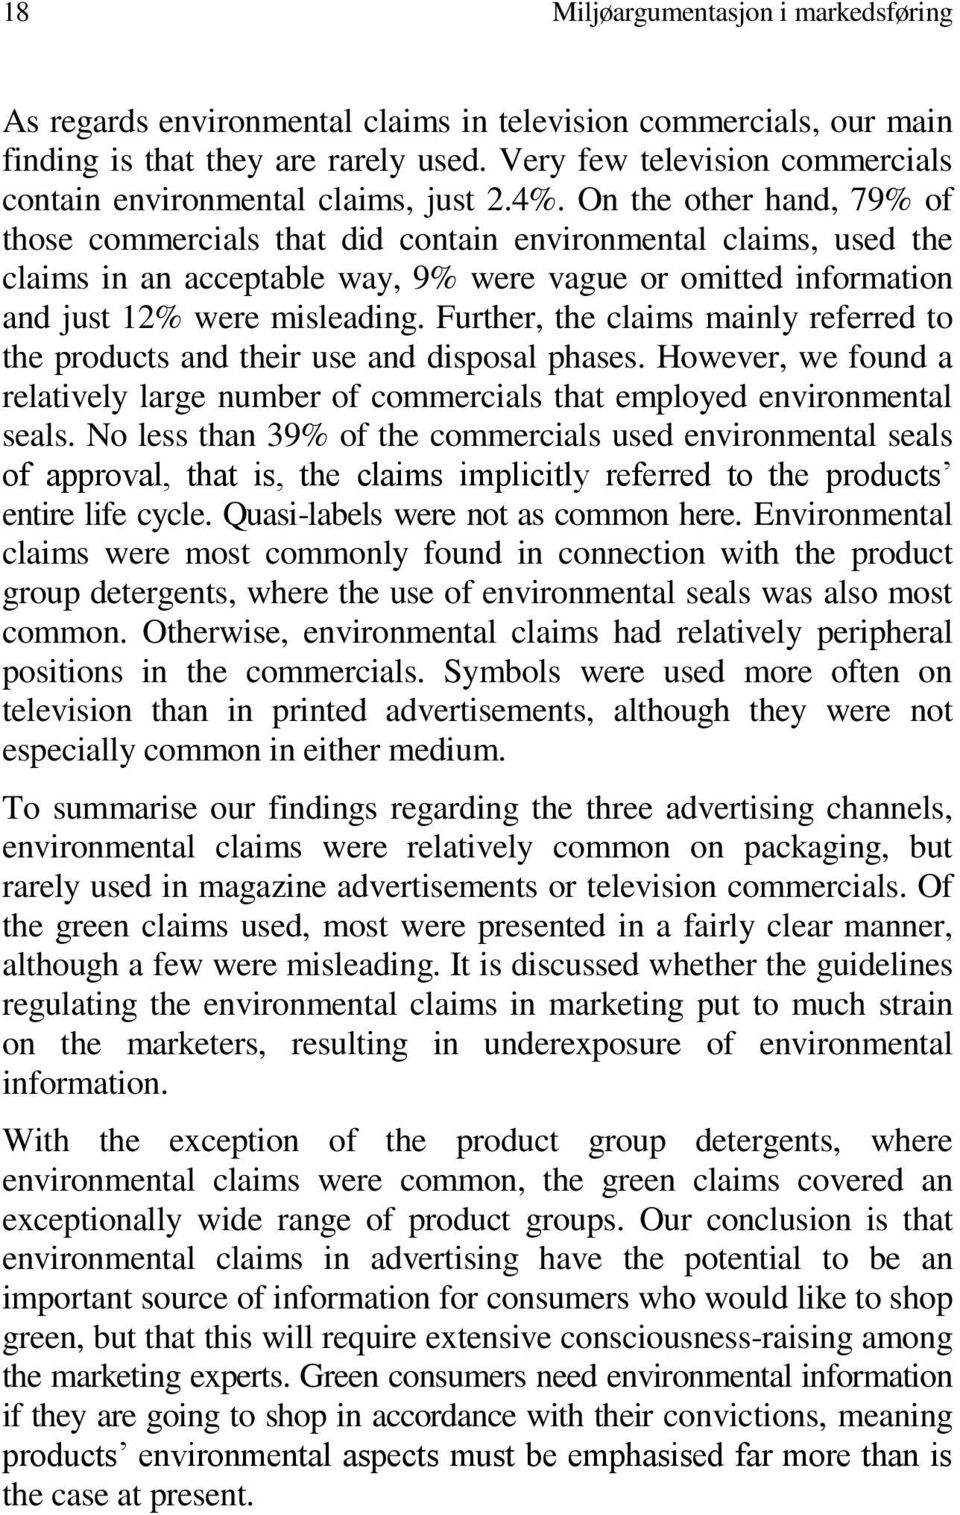 On the other hand, 79% of those commercials that did contain environmental claims, used the claims in an acceptable way, 9% were vague or omitted information and just 12% were misleading.